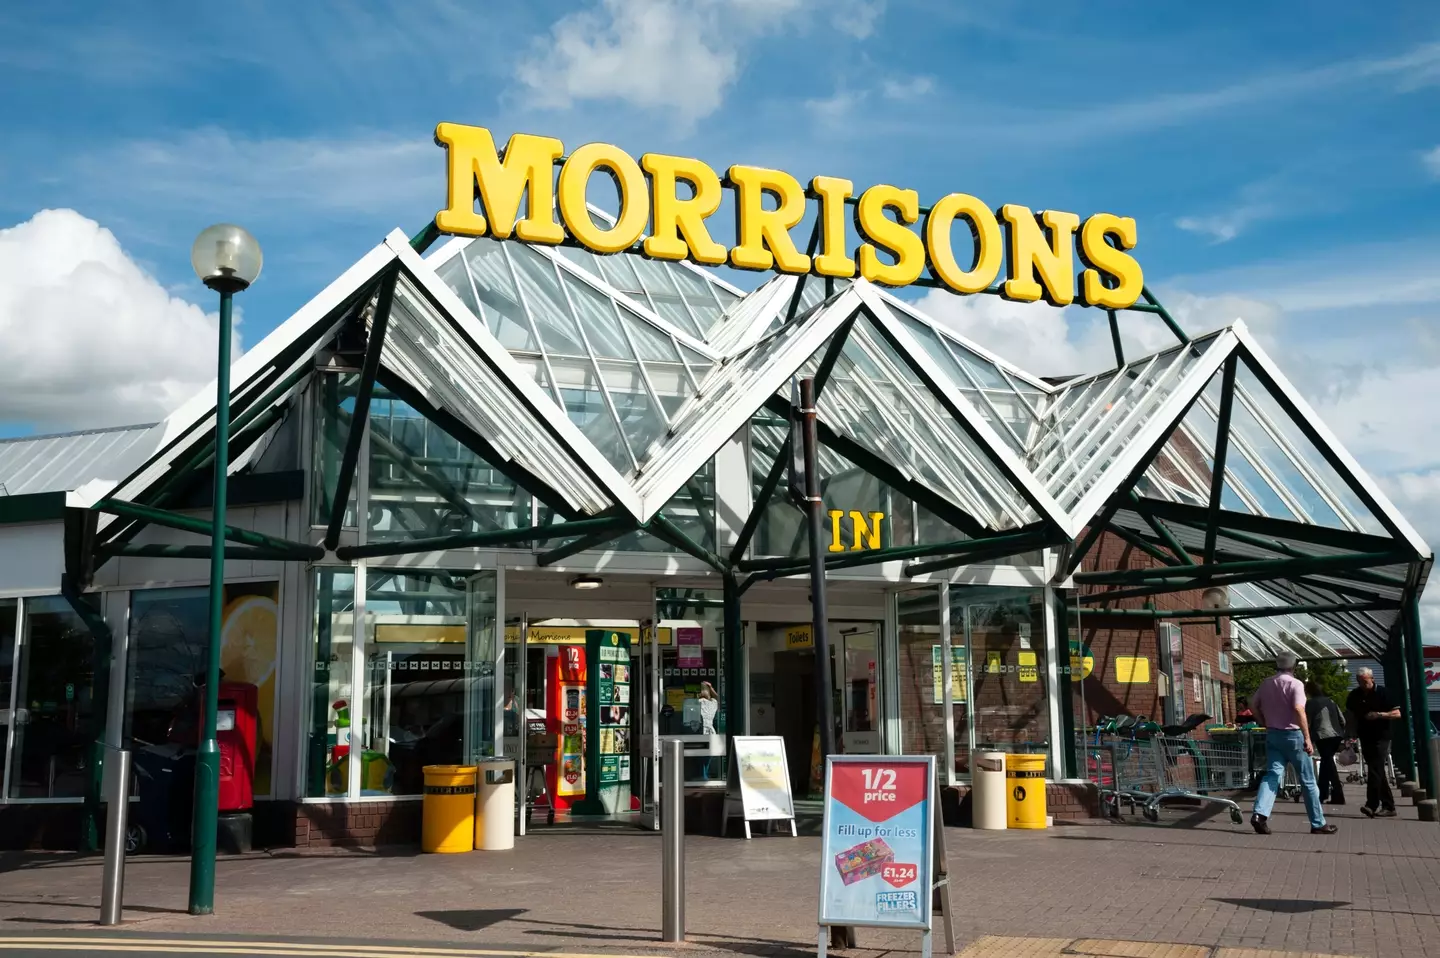 The cost of essential items at Morrisons have increased by 14% in Manchester.